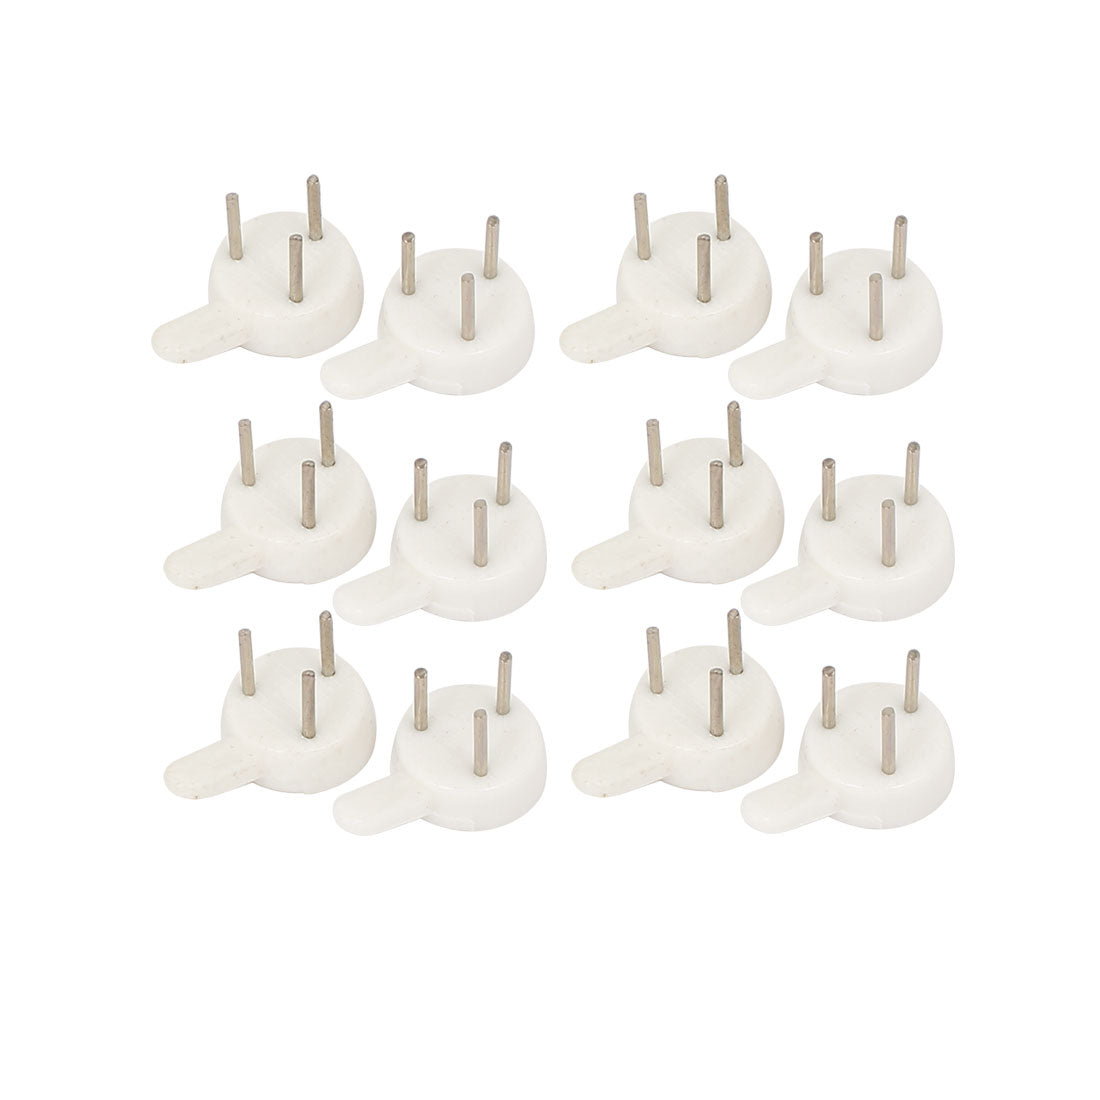 uxcell Uxcell Household Picture Frame Clock Plastic Wall Hook Hanger Seamless Nail White 12pcs